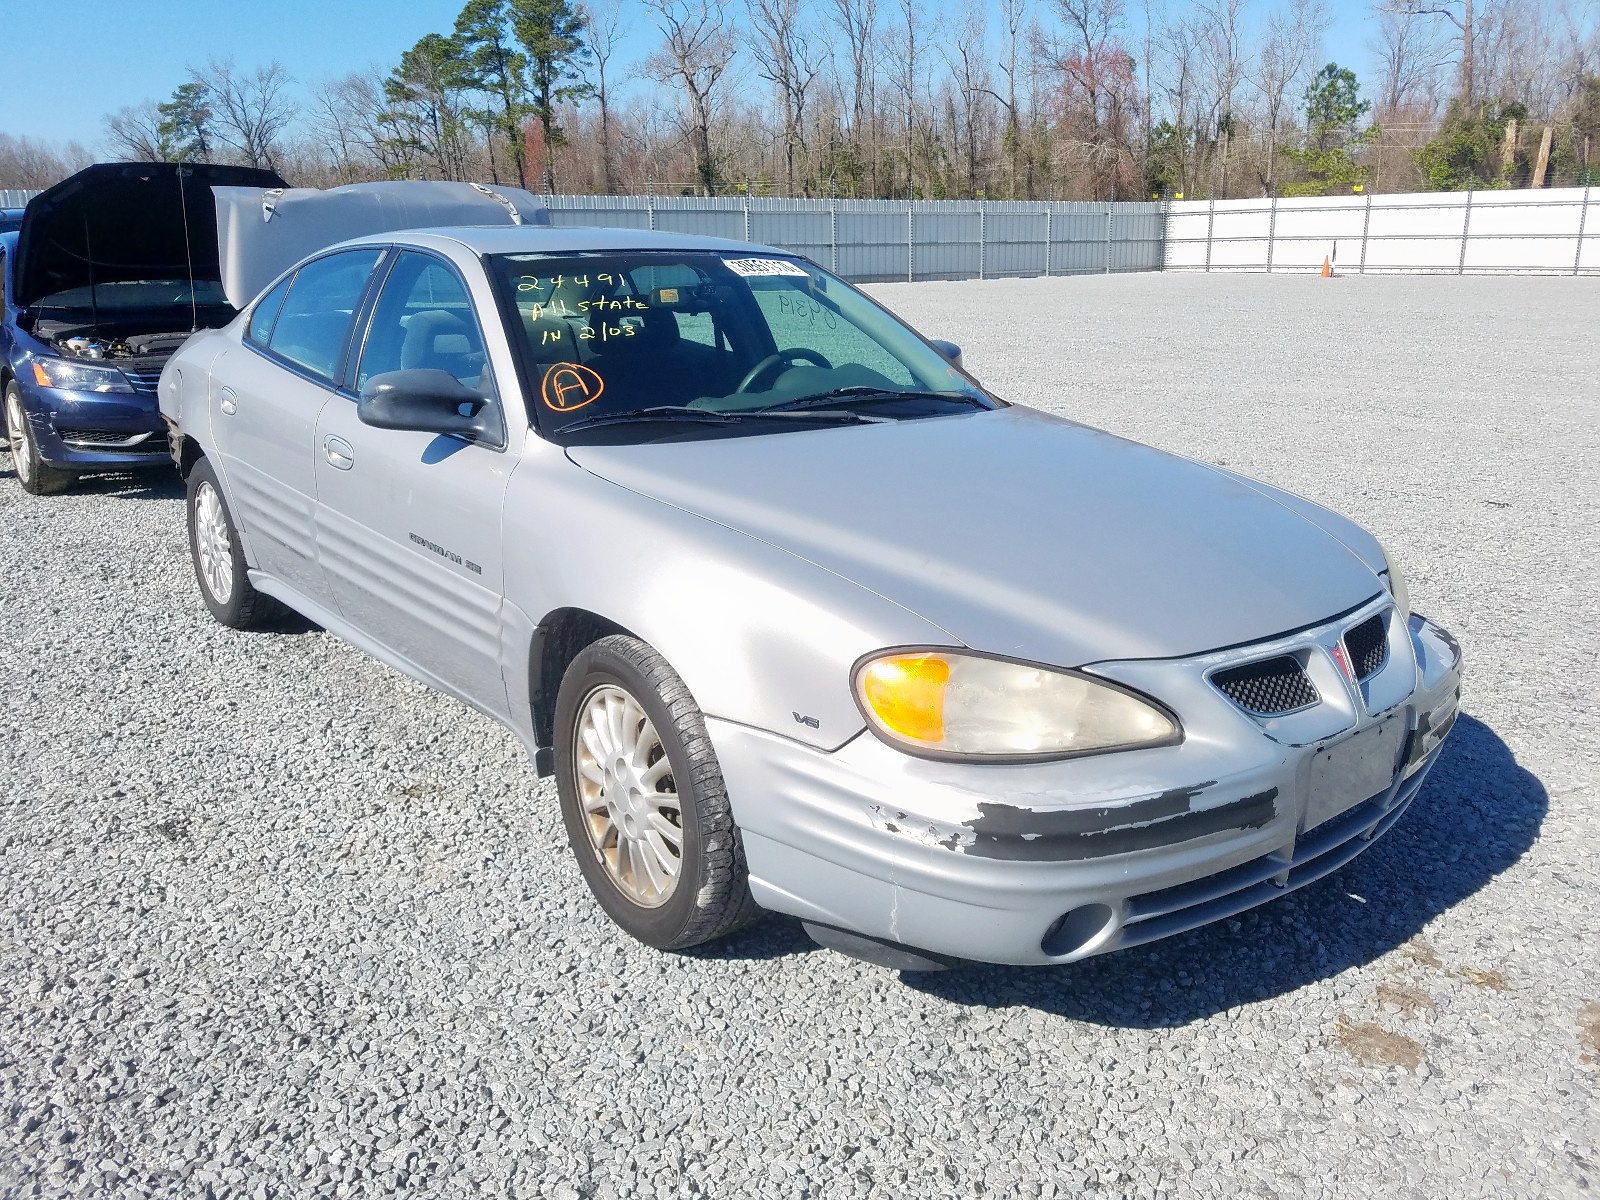 1999 pontiac grand am s for sale at copart lumberton nc lot 30551110 salvagereseller com salvagereseller com